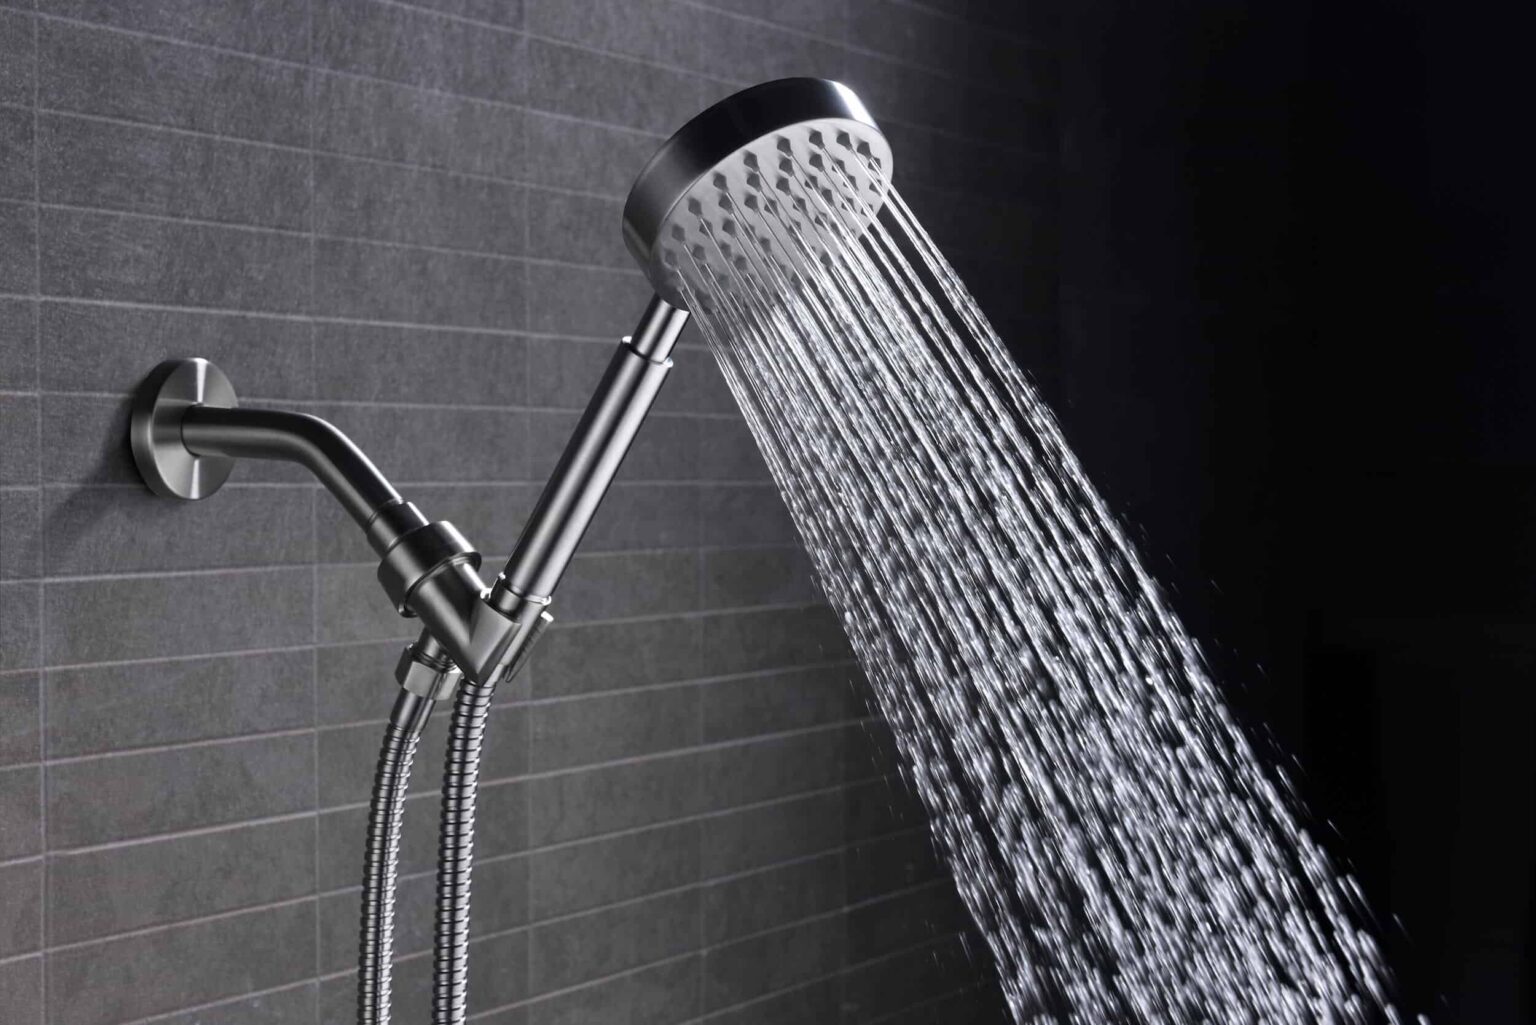 Shower Head Installation Is The Best Bathroom Upgrades For Renters